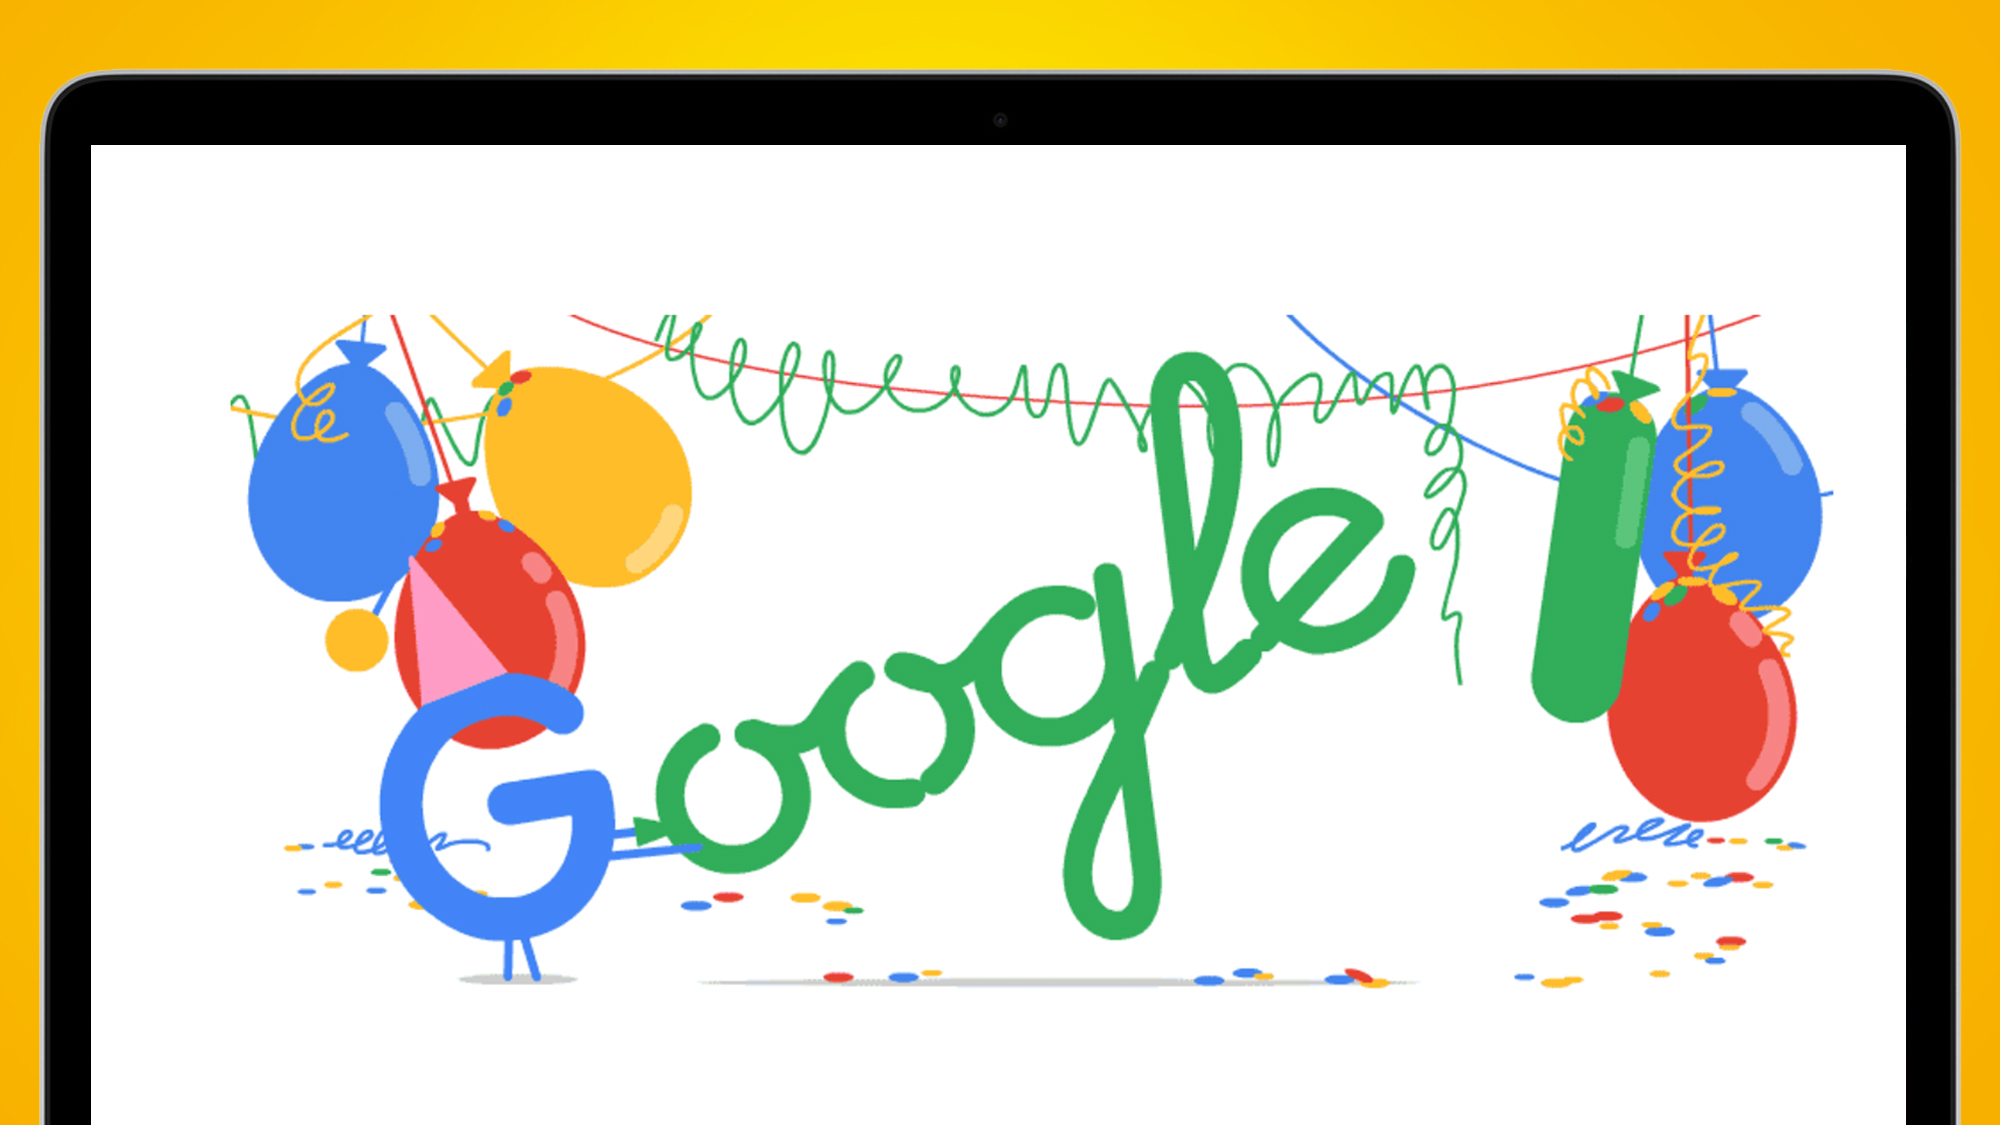 The Google logo adorned with colorful balloons and festive decorations.